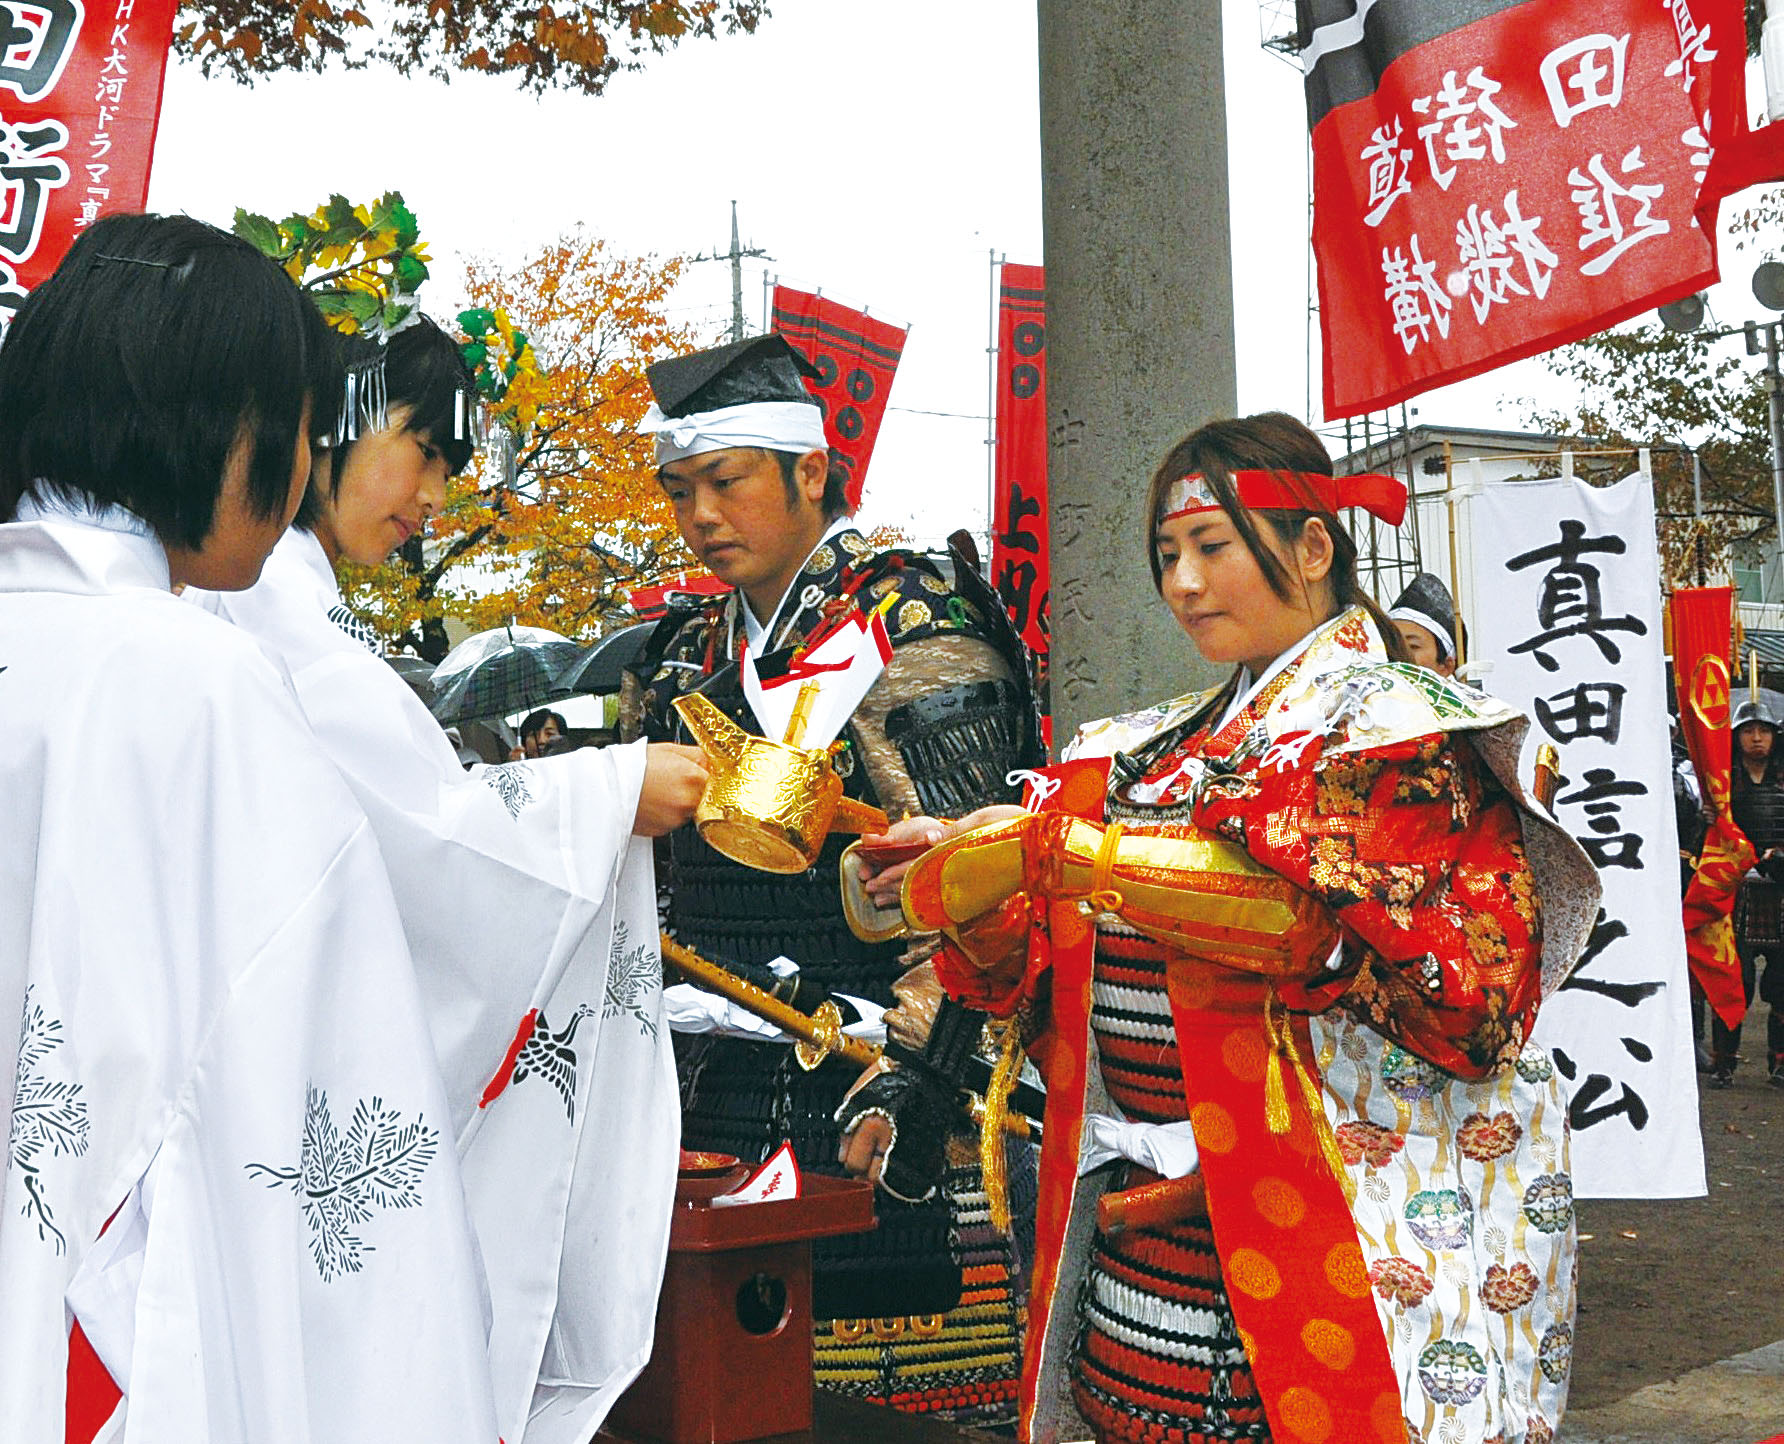 Dressed as Lord Nobuyuki and Princess Komatsu in a wedding ceremony “The bride of the castle owner”